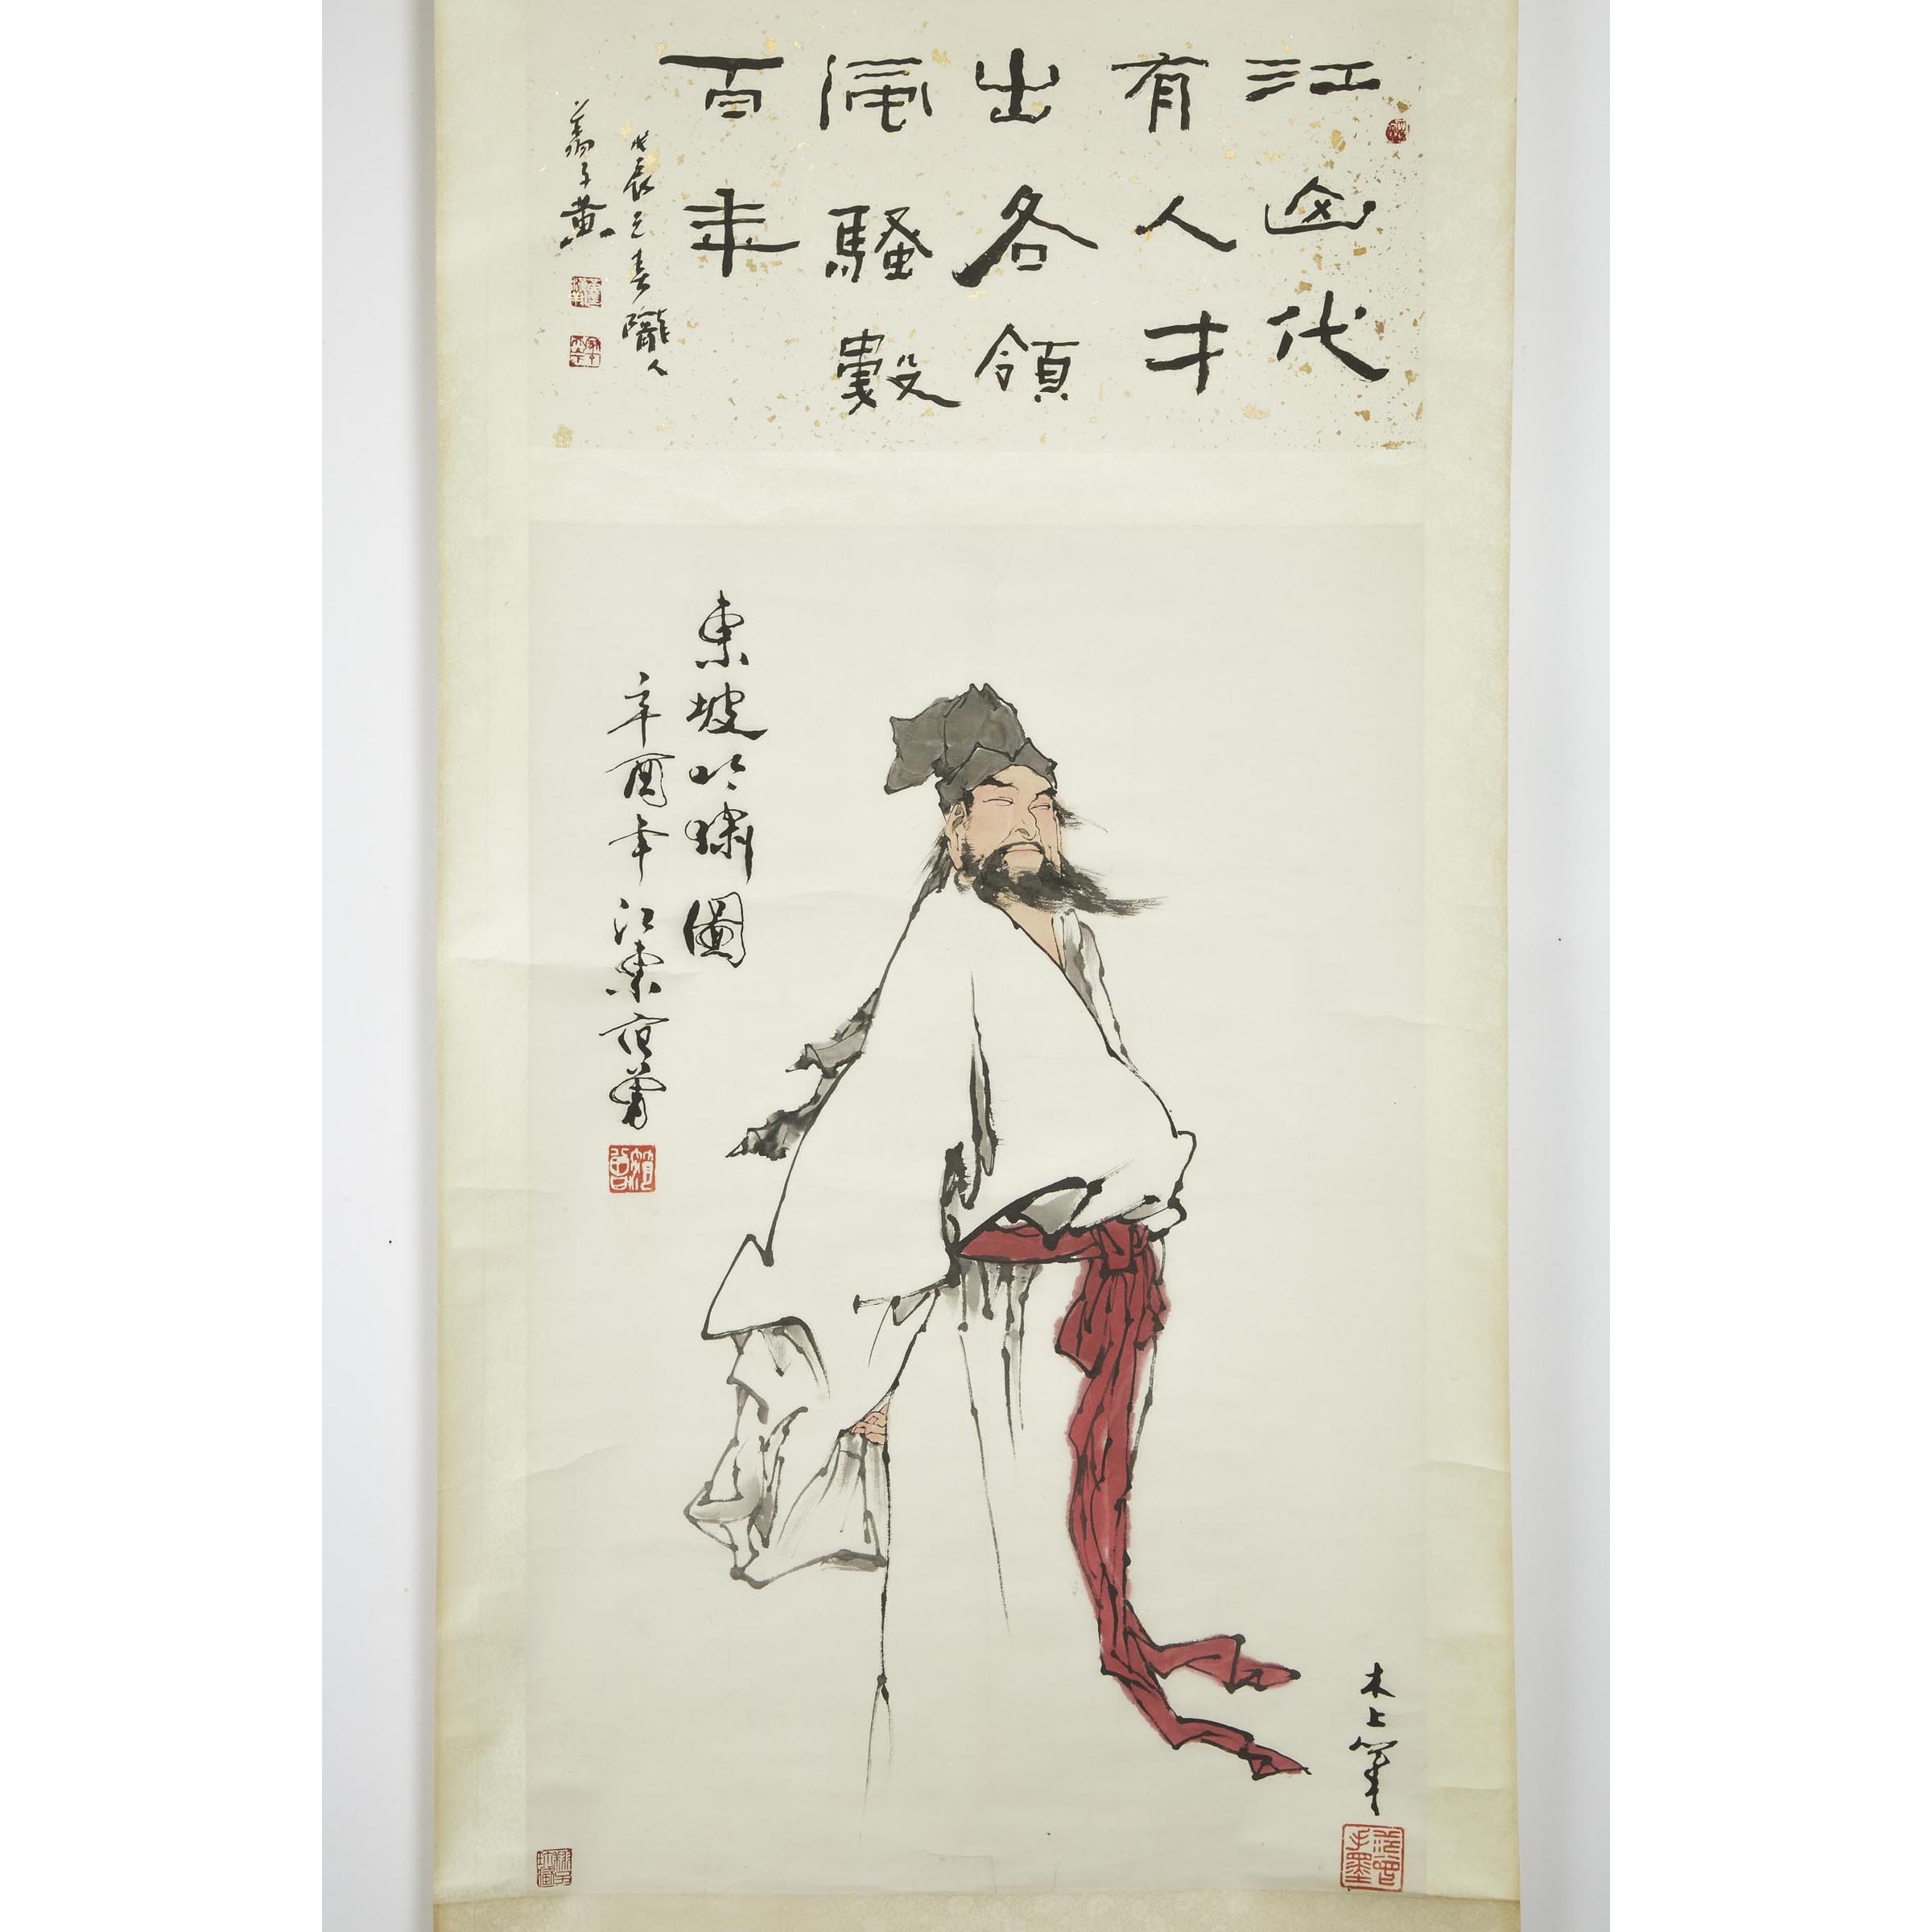 Artwork by Fan Zeng, 范曾 (1938- ) 东坡吟啸图 设色纸本 立轴 作于1989年, Made of Ink and colour on paper, hanging scroll mounted